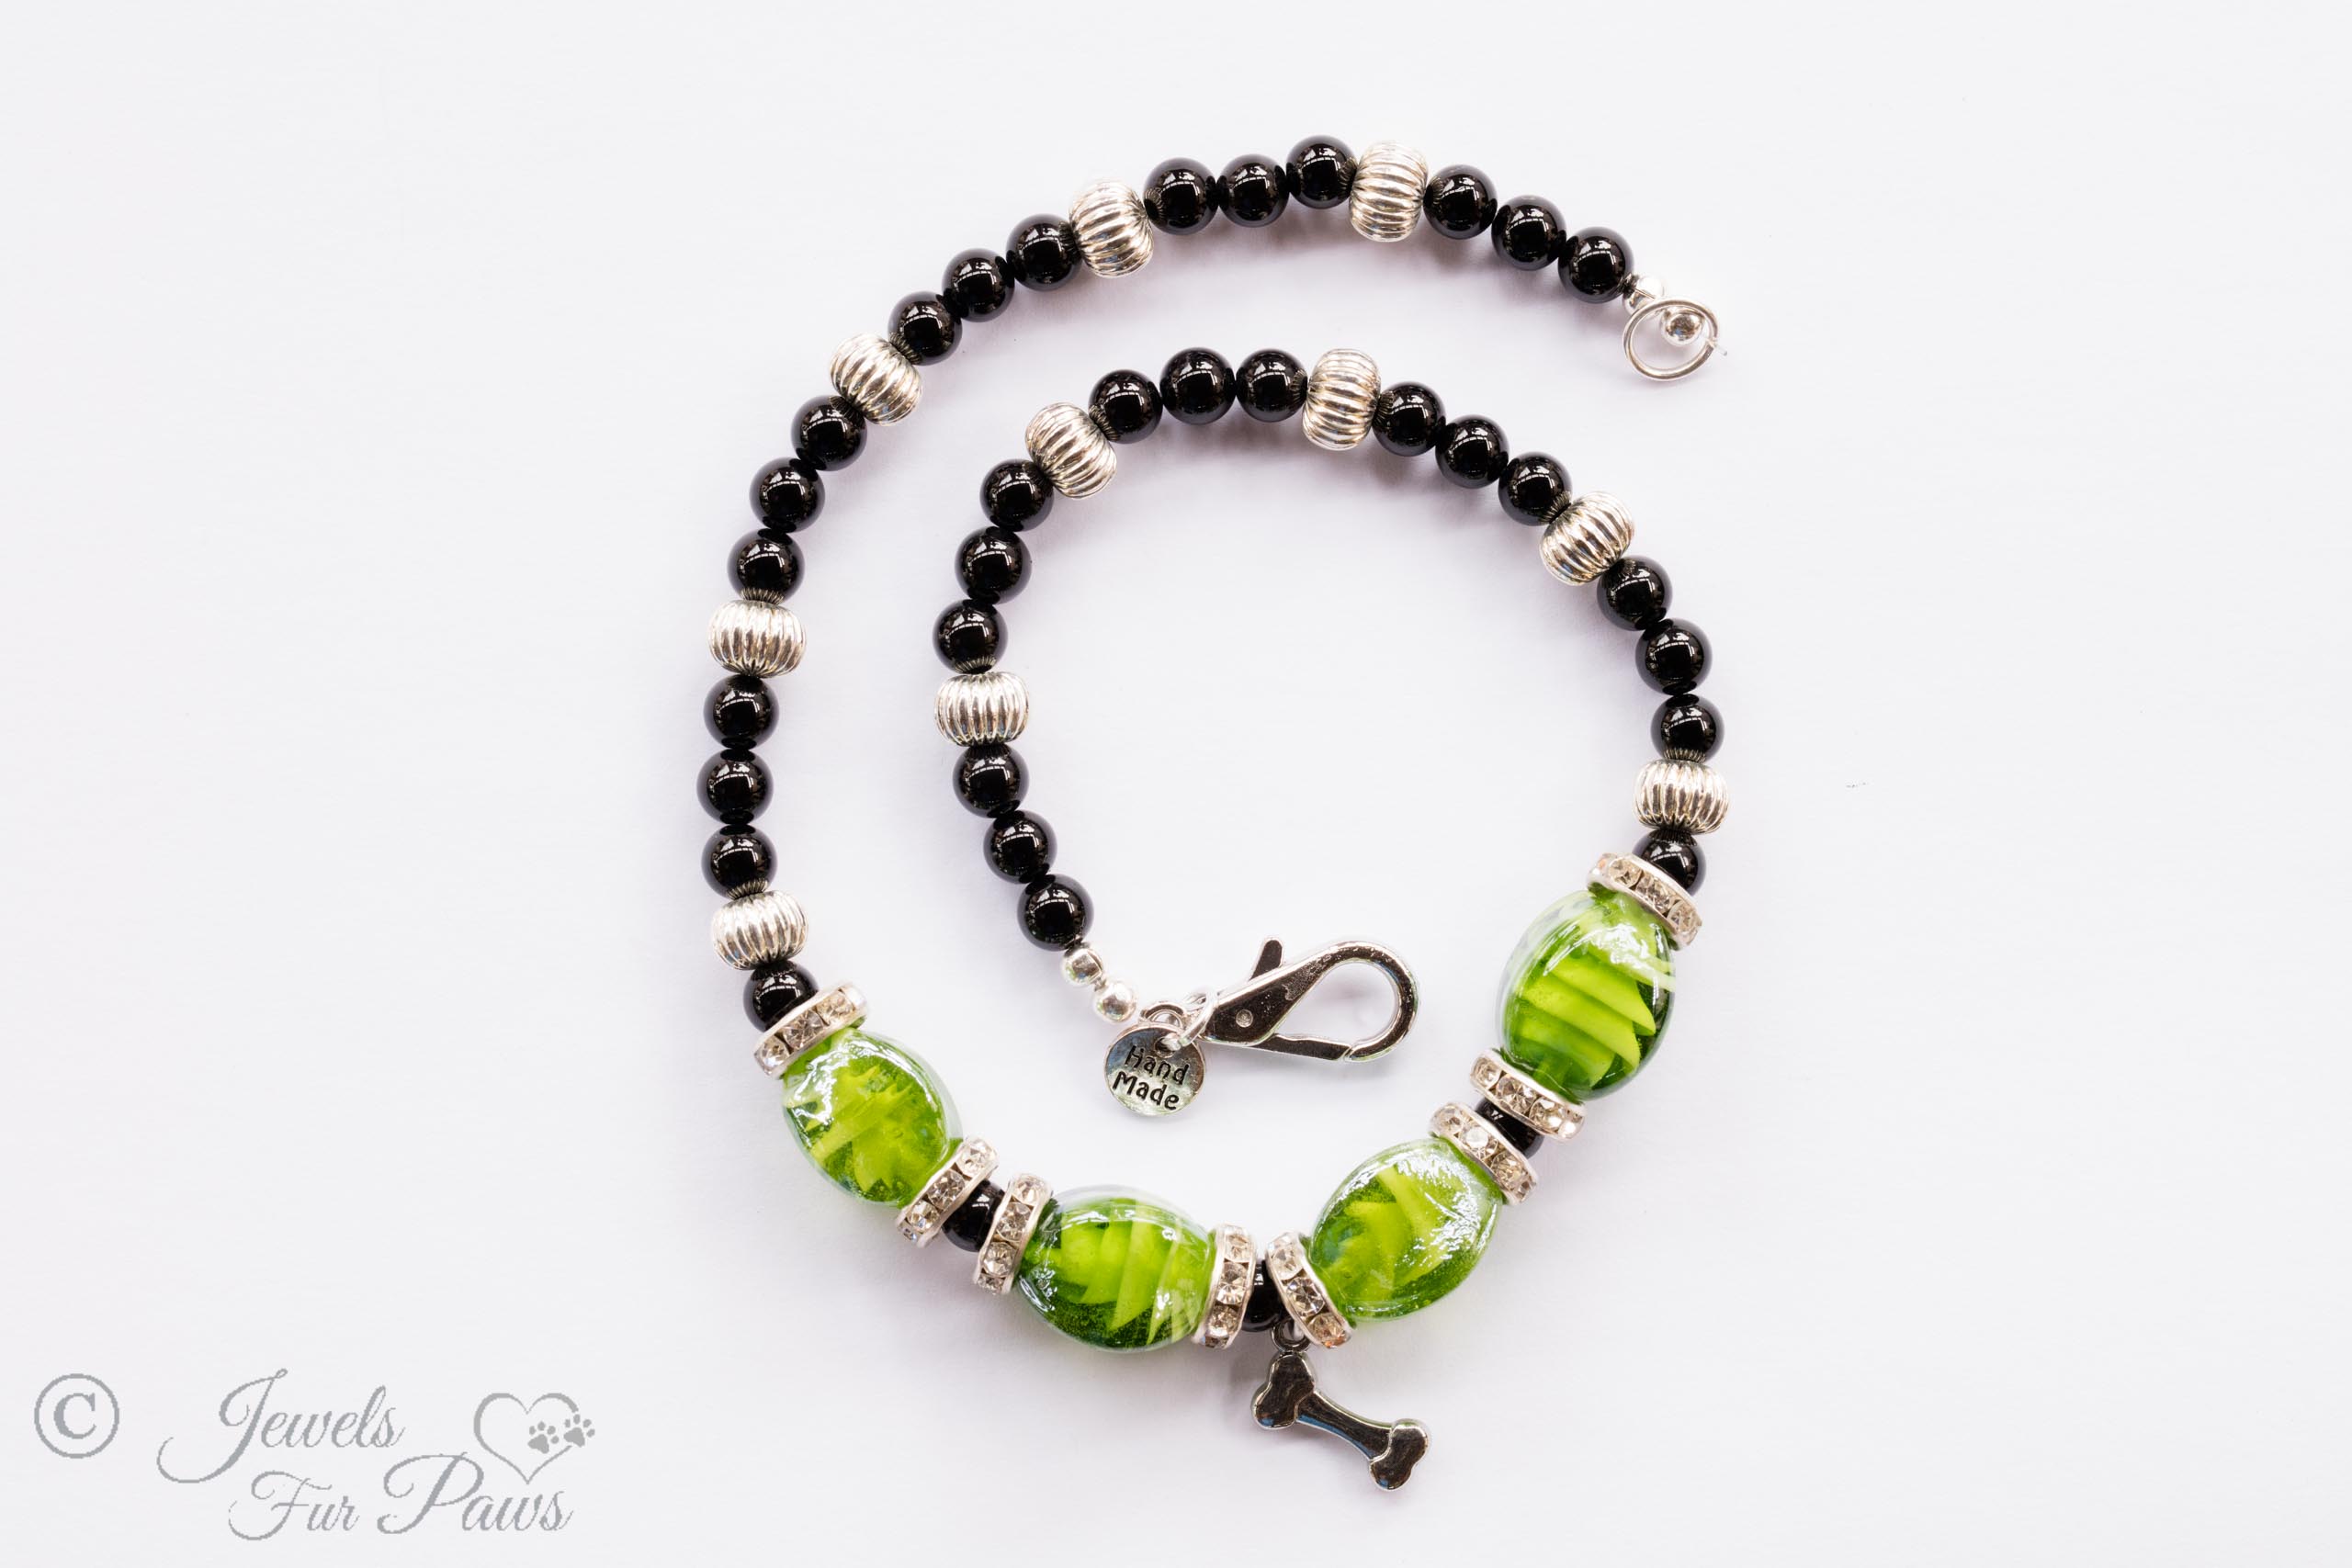 cat dog pet medium necklace four green lampwork glass beads with black onyx beads and fluted silver rondel spacers with channel set swarovski crystals on white background